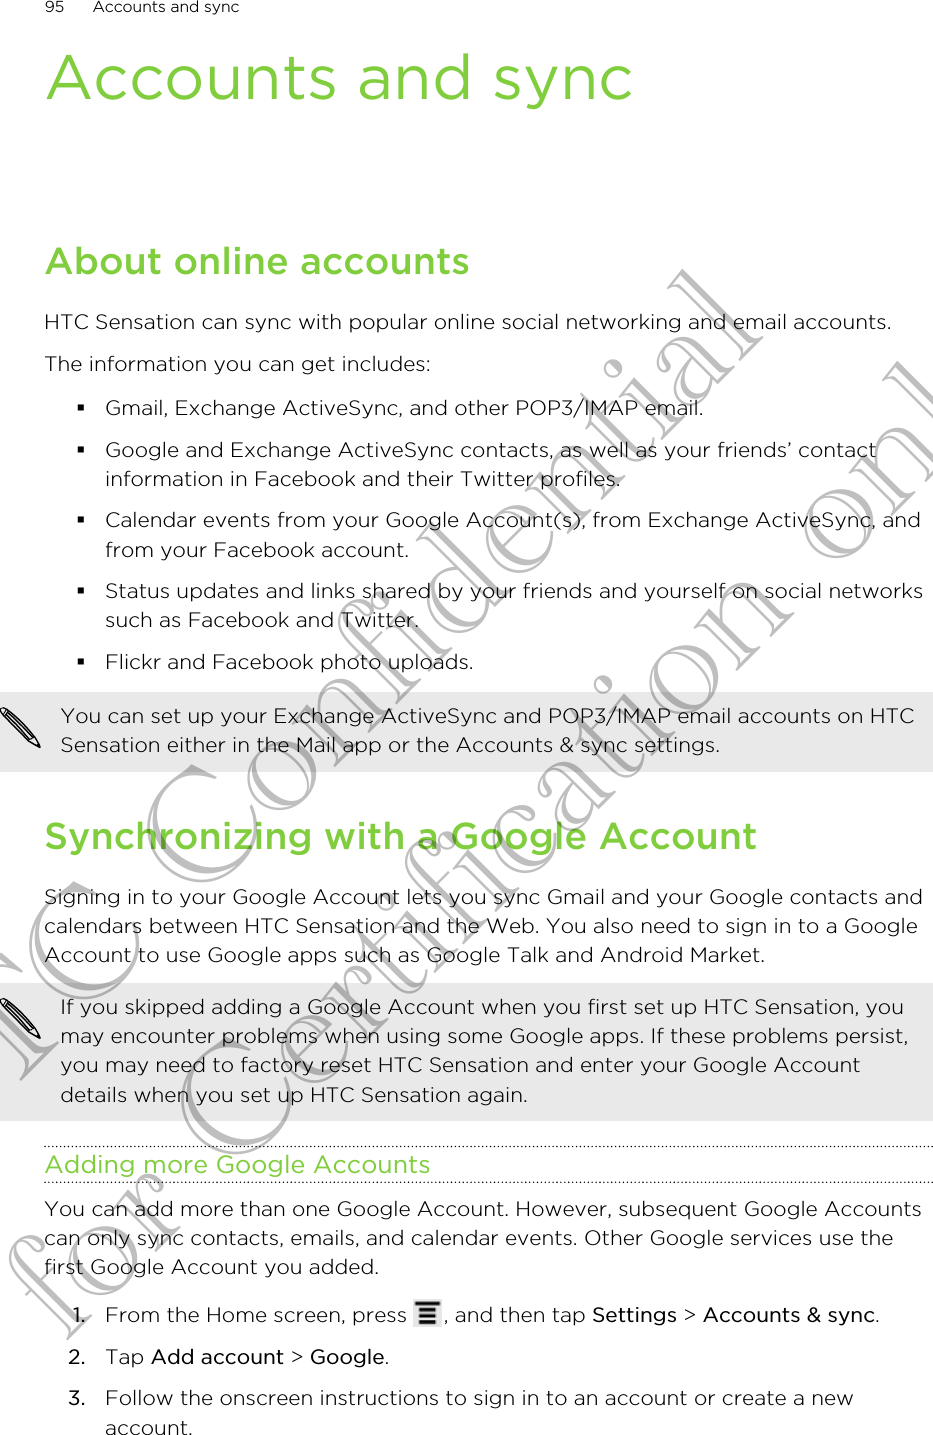 Accounts and syncAbout online accountsHTC Sensation can sync with popular online social networking and email accounts.The information you can get includes:§Gmail, Exchange ActiveSync, and other POP3/IMAP email.§Google and Exchange ActiveSync contacts, as well as your friends’ contactinformation in Facebook and their Twitter profiles.§Calendar events from your Google Account(s), from Exchange ActiveSync, andfrom your Facebook account.§Status updates and links shared by your friends and yourself on social networkssuch as Facebook and Twitter.§Flickr and Facebook photo uploads.You can set up your Exchange ActiveSync and POP3/IMAP email accounts on HTCSensation either in the Mail app or the Accounts &amp; sync settings.Synchronizing with a Google AccountSigning in to your Google Account lets you sync Gmail and your Google contacts andcalendars between HTC Sensation and the Web. You also need to sign in to a GoogleAccount to use Google apps such as Google Talk and Android Market.If you skipped adding a Google Account when you first set up HTC Sensation, youmay encounter problems when using some Google apps. If these problems persist,you may need to factory reset HTC Sensation and enter your Google Accountdetails when you set up HTC Sensation again.Adding more Google AccountsYou can add more than one Google Account. However, subsequent Google Accountscan only sync contacts, emails, and calendar events. Other Google services use thefirst Google Account you added.1. From the Home screen, press  , and then tap Settings &gt; Accounts &amp; sync.2. Tap Add account &gt; Google.3. Follow the onscreen instructions to sign in to an account or create a newaccount.95 Accounts and syncHTC Confidential for Certification only